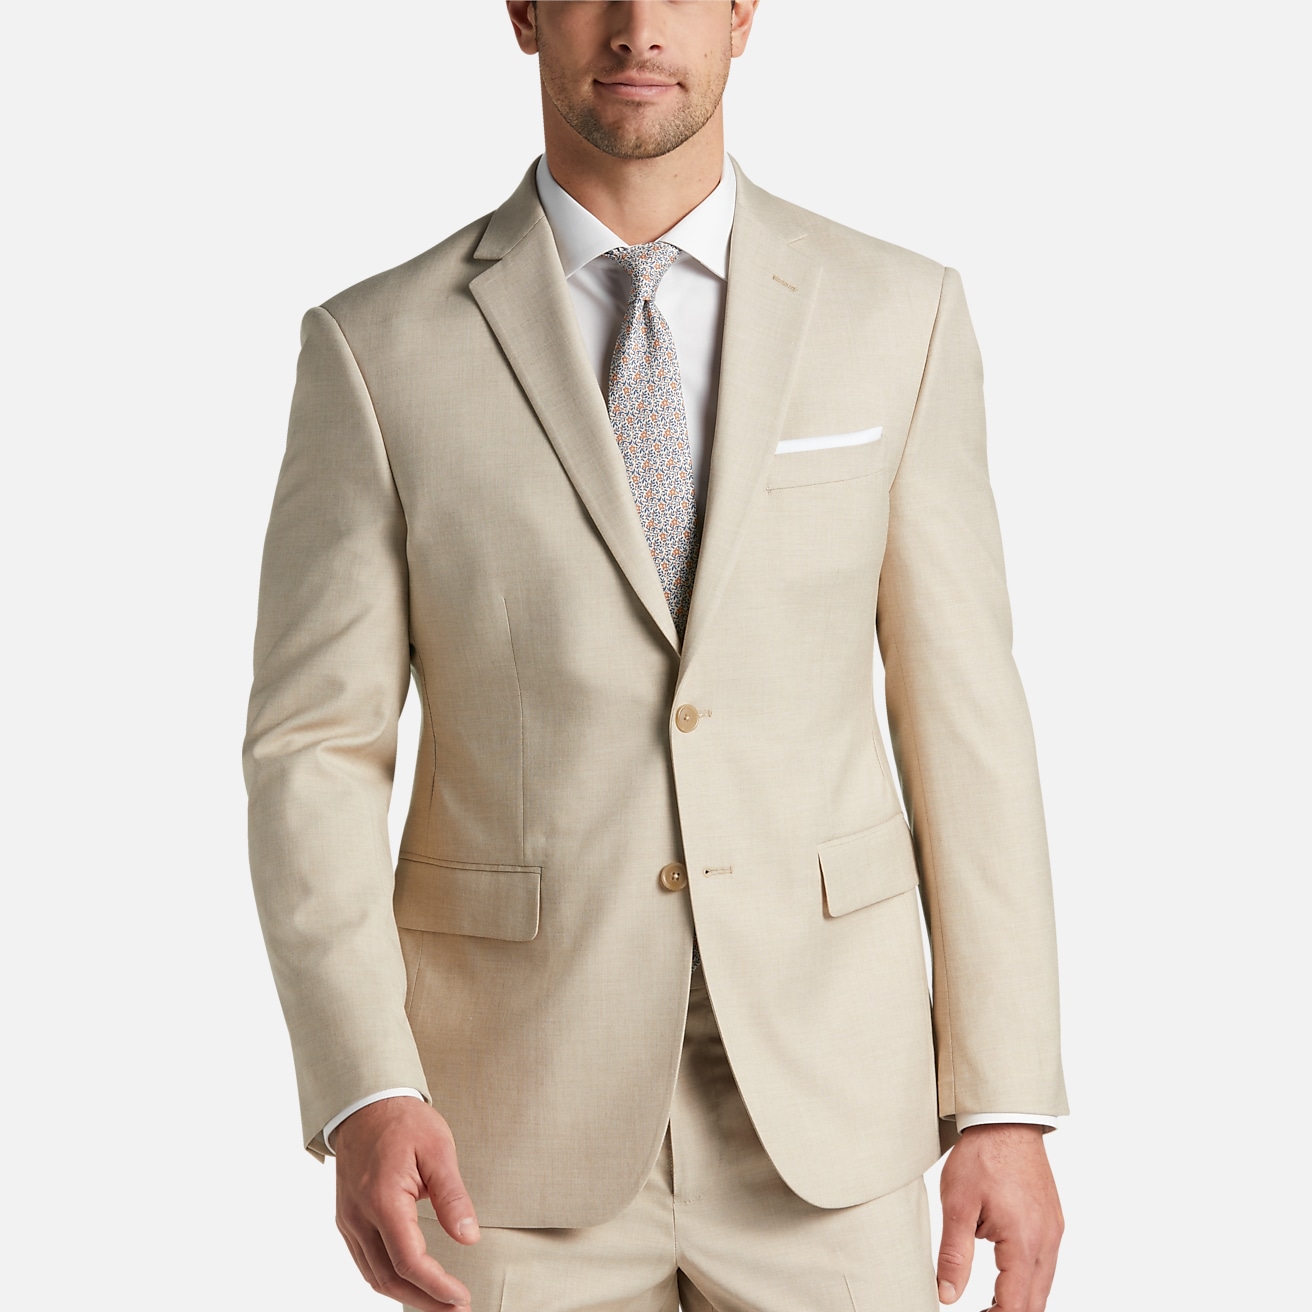 https://image.menswearhouse.com/is/image/TMW/TMW_3XPF_05_PRONTO_UOMO_SUIT_SEPARATE_JACKETS_TAN_SHARKSKIN_MAIN?imPolicy=pdp-mob-2x